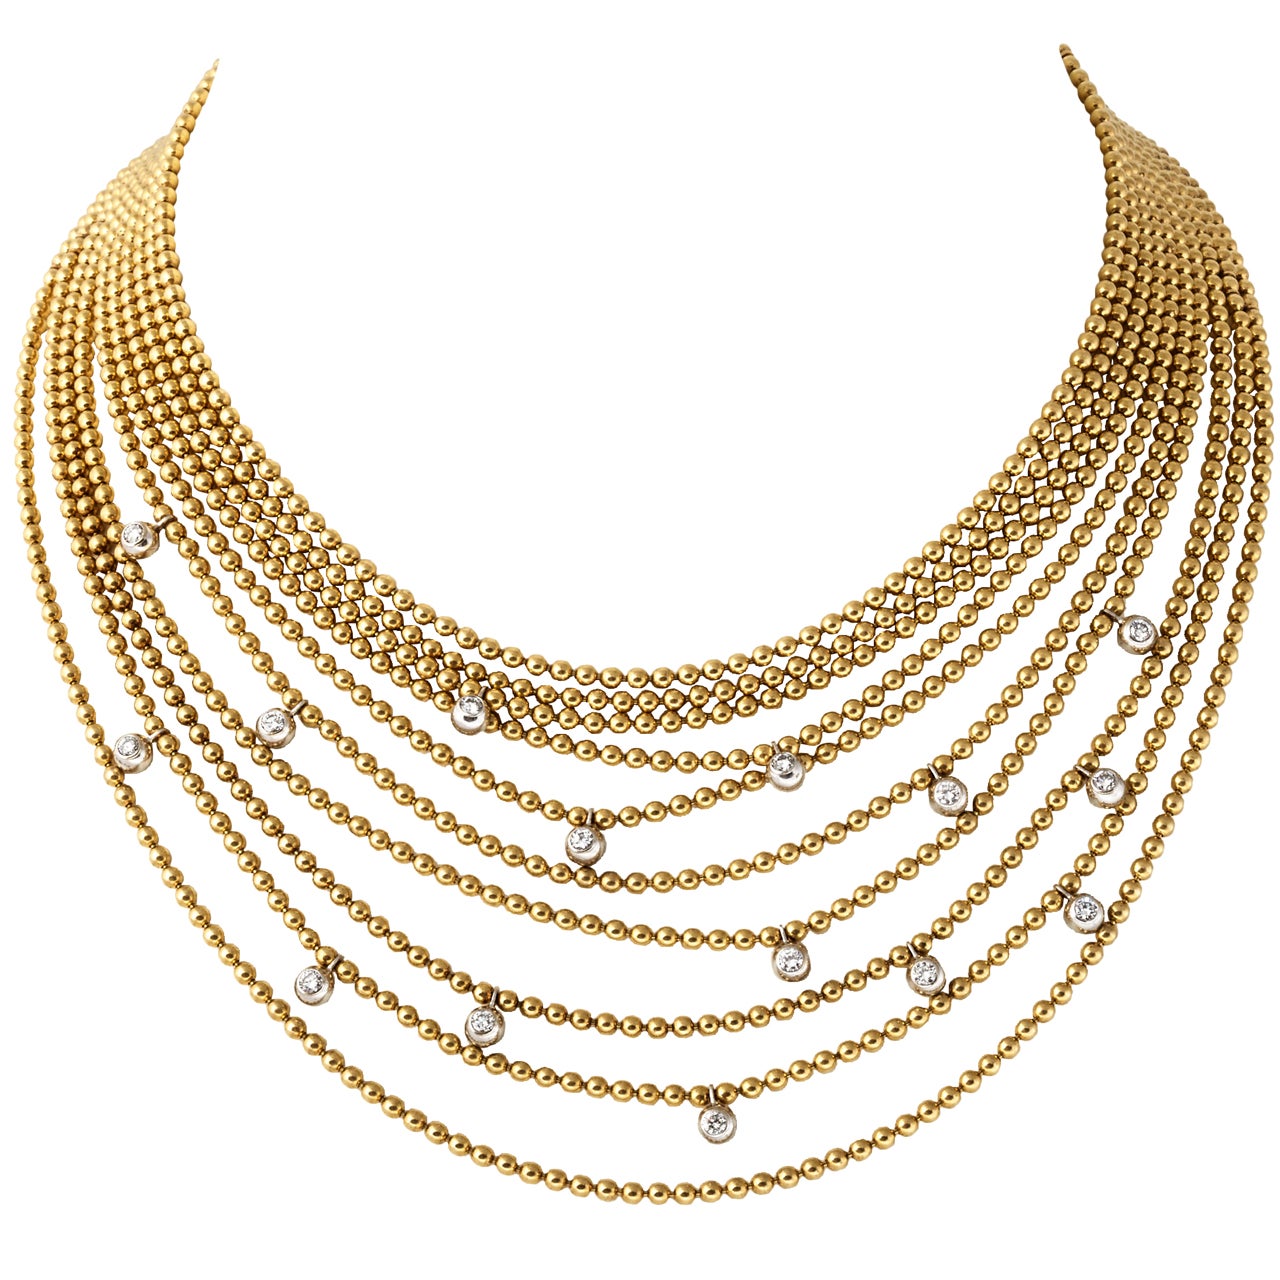 A gold and diamond draperie ball necklace by Cartier